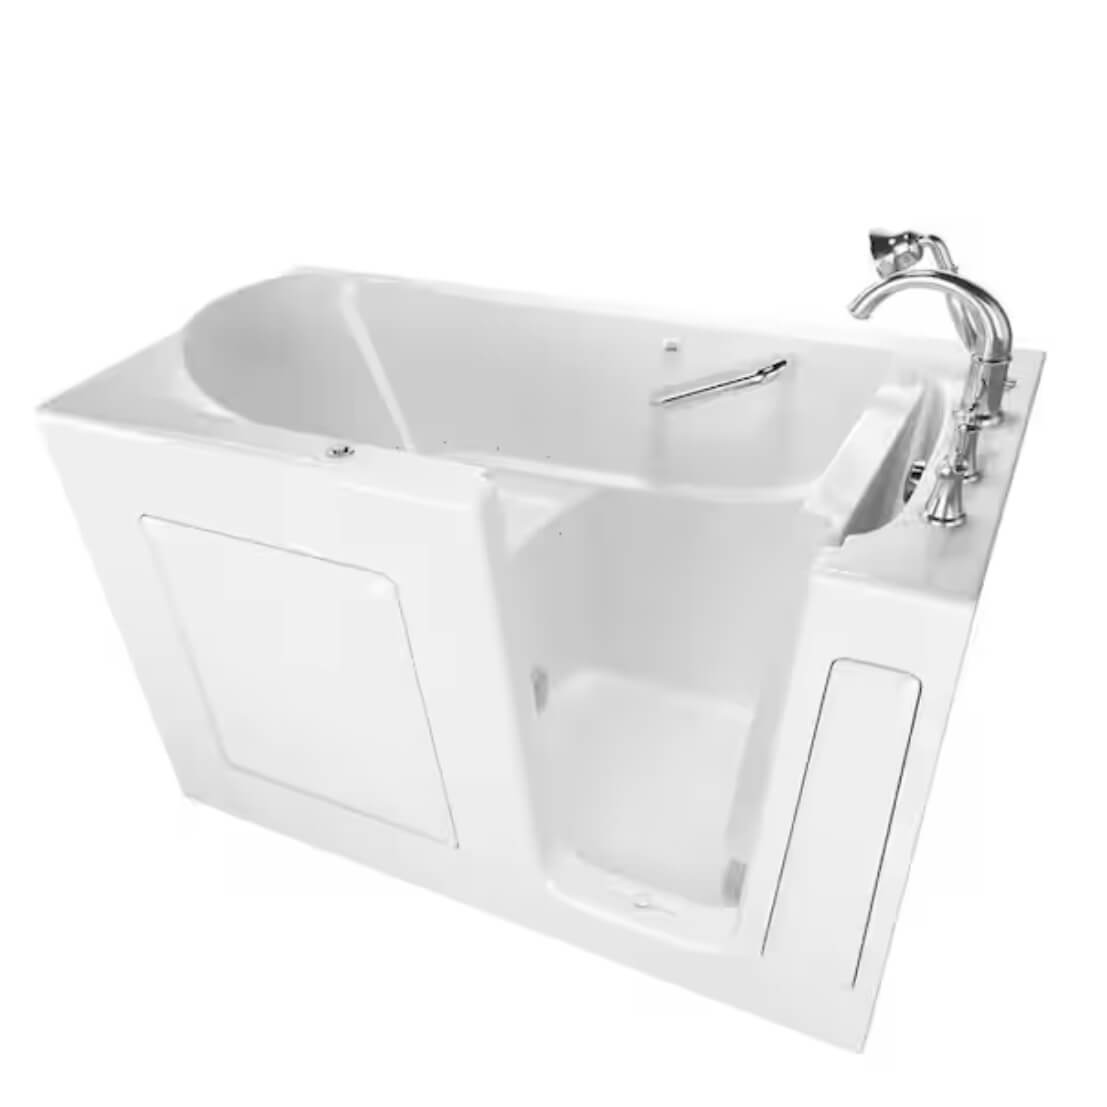 Review The Air Bath Option and Cost for American Standard Walk-in Tubs